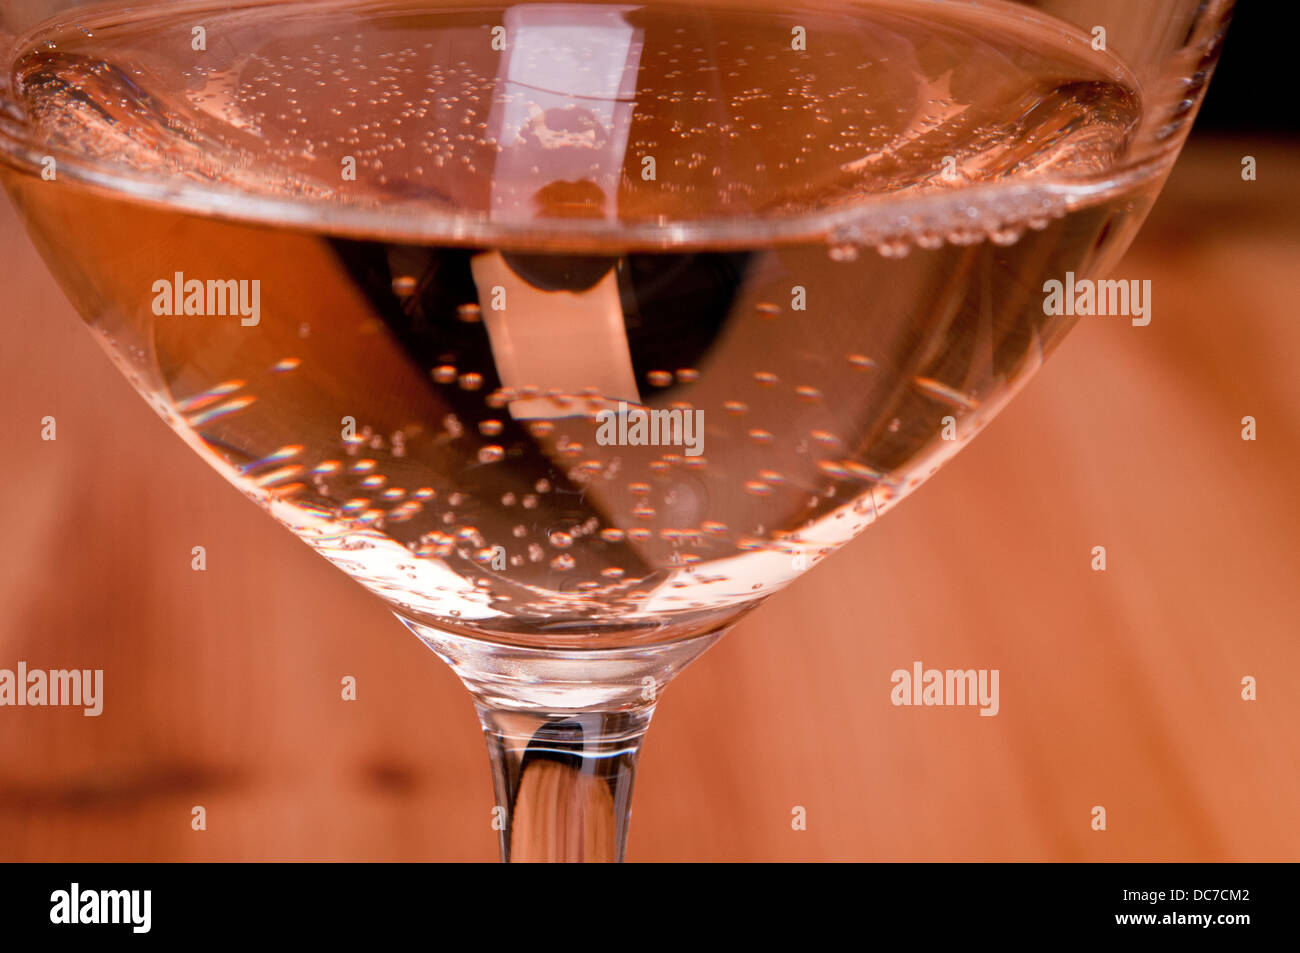 Carbonic acid in a glass of rose wine Stock Photo